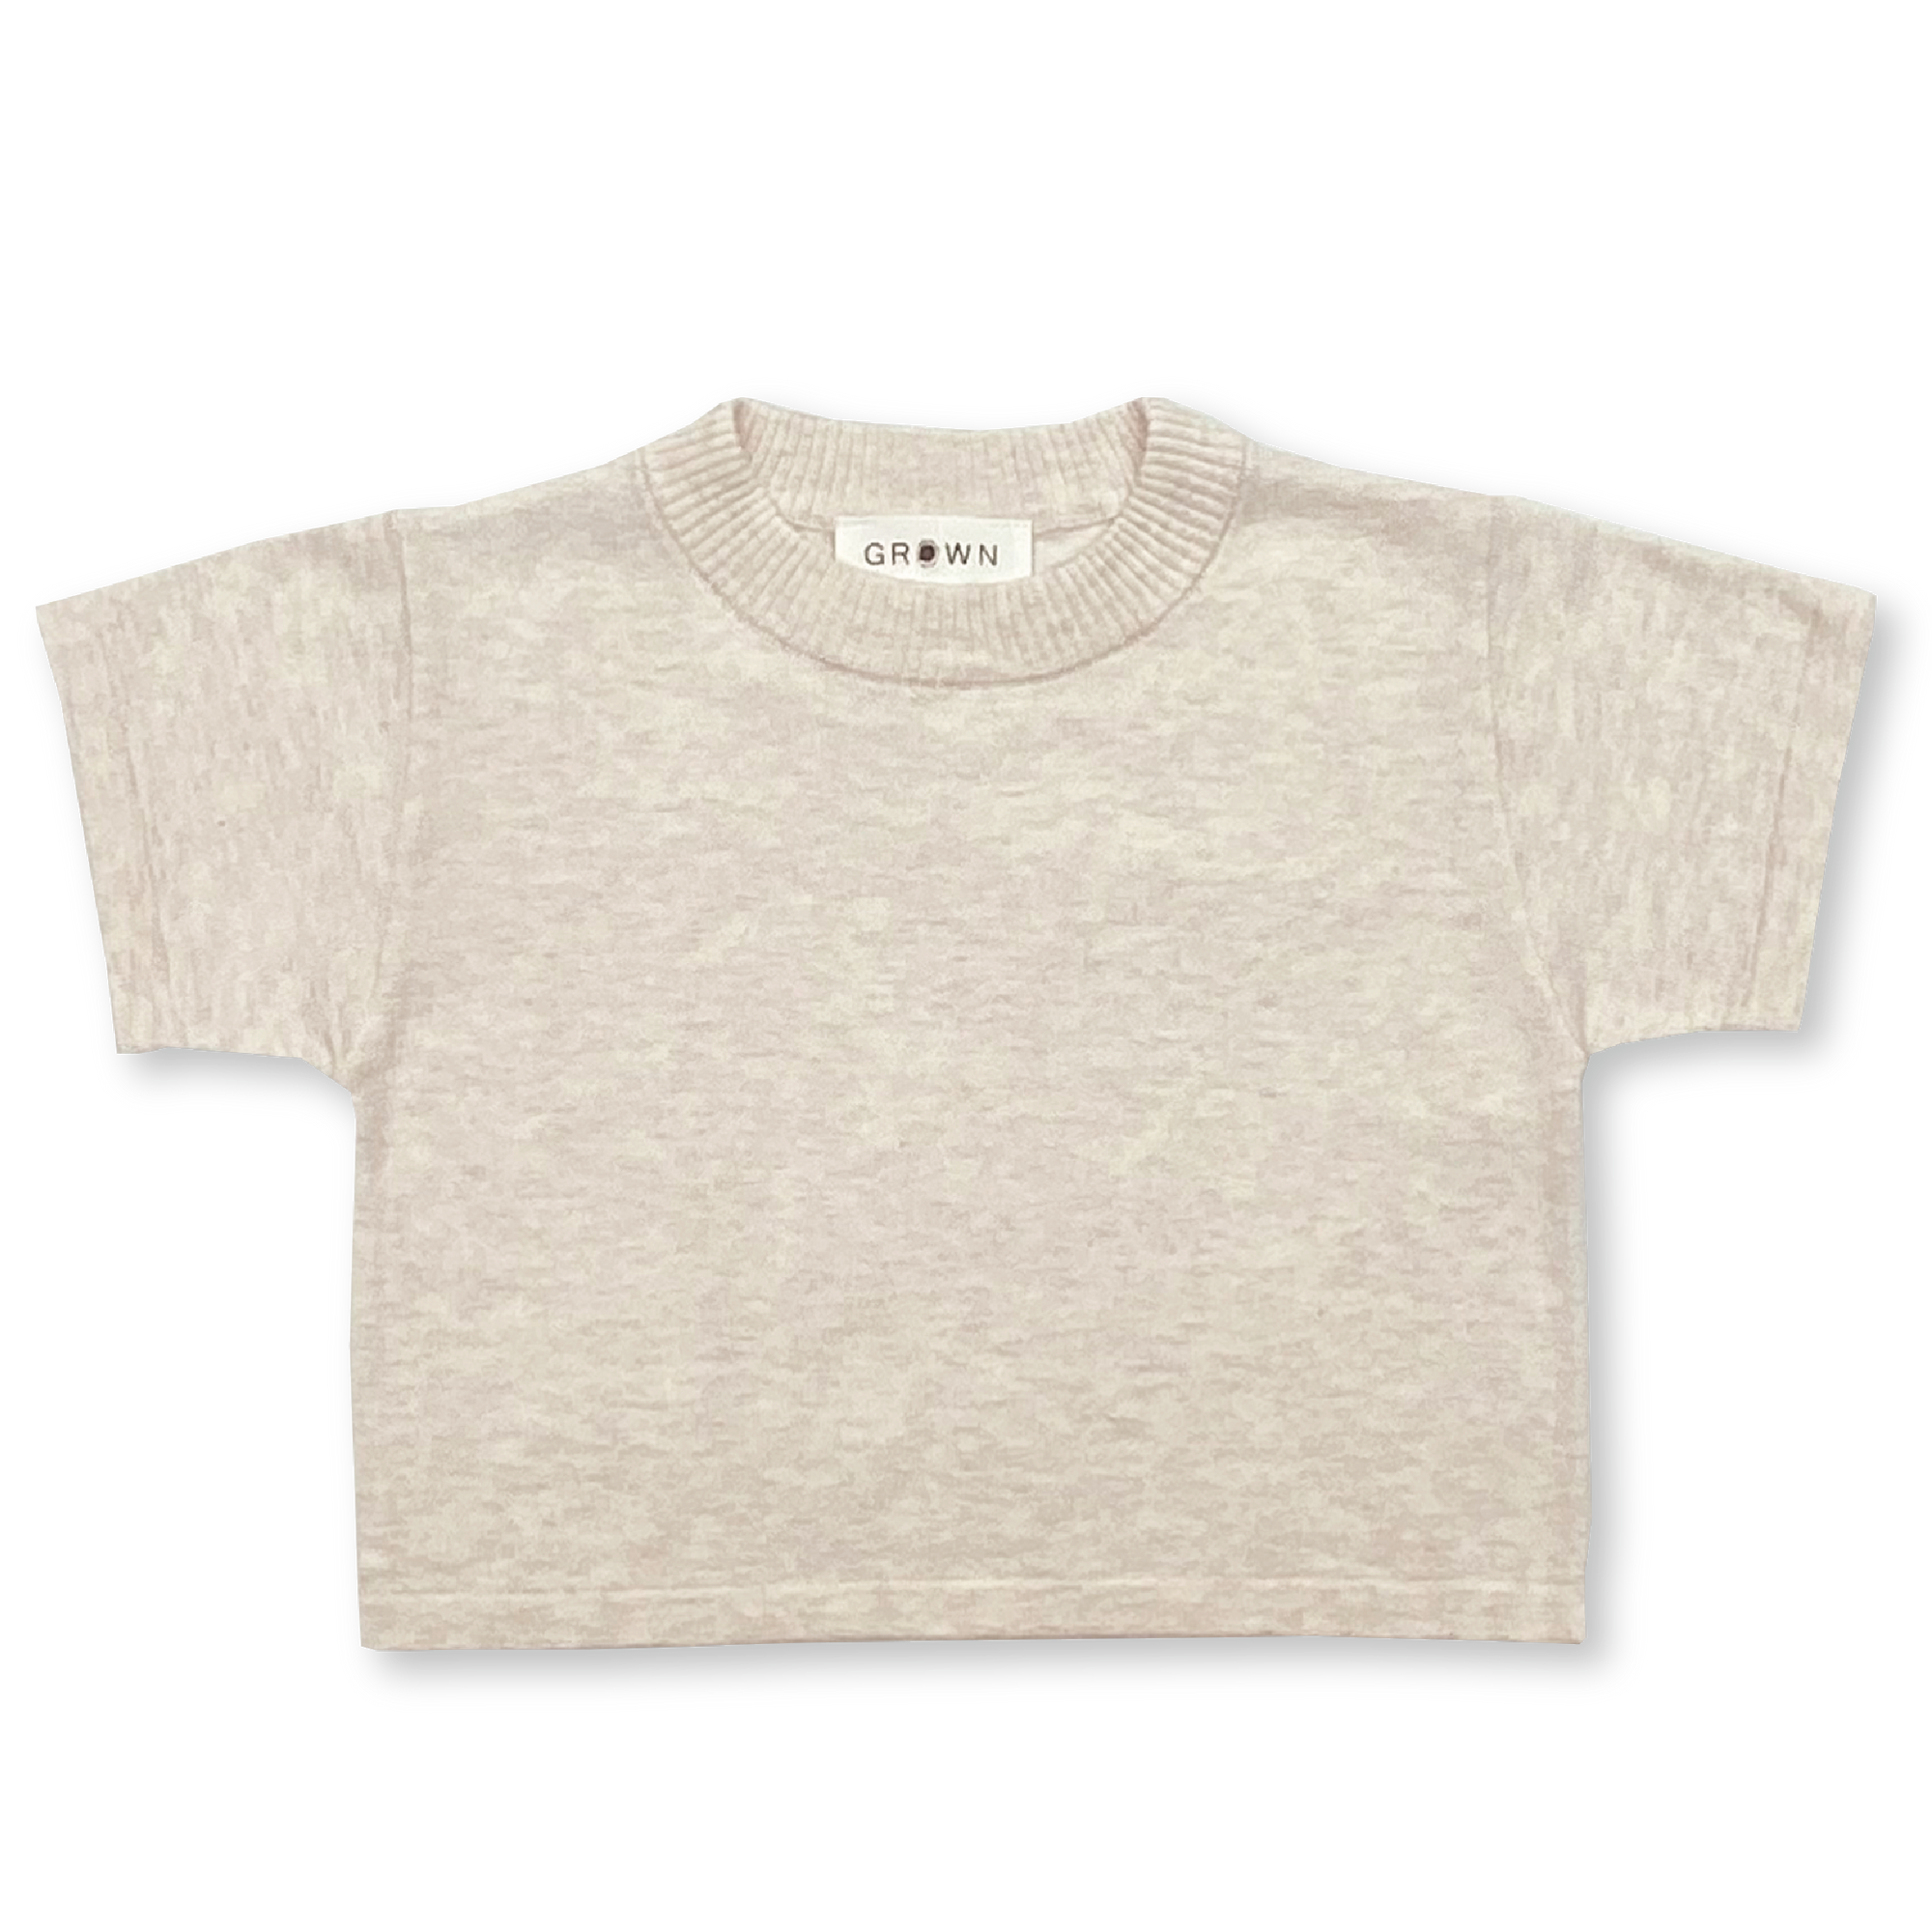 GROWN KNITTED ORGANIC TEE: COCONUT